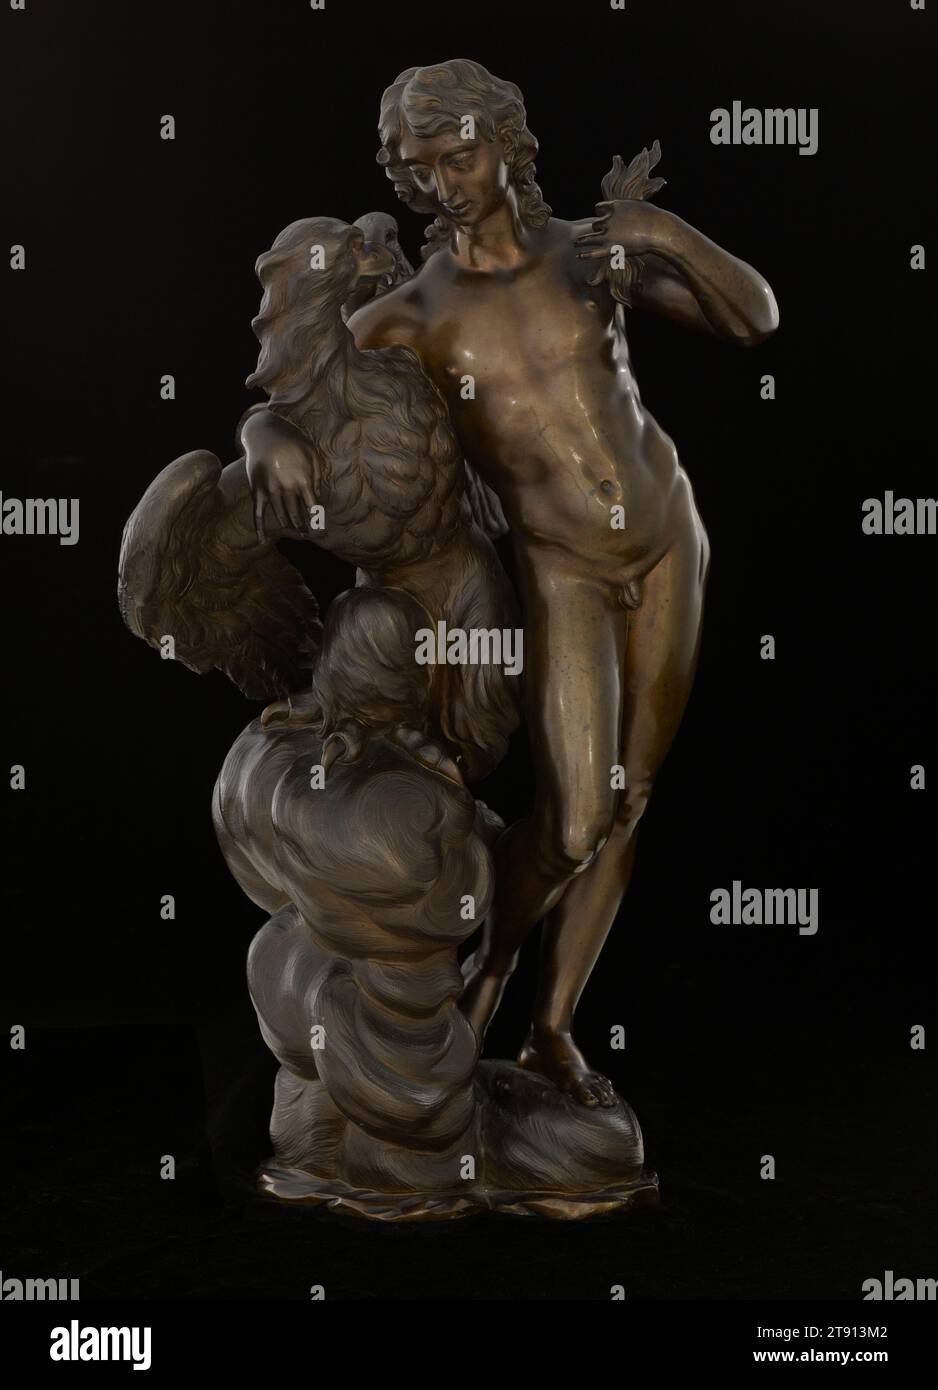 Ganymede and the Eagle, c. 1710, Antonio Montauti, Italian (Florence), Italian, 1664-1742, 18 1/2 in. (46.99 cm), Bronze, Italy, 18th century, Captivated by the beauty of the shepherd Ganymede, Zeus transformed himself into an eagle and abducted the youth, whom he then installed as cupbearer to the gods on Mount Olympus for eternity. In most representations, the mortal shepherd boy is shown overpowered by the formidable eagle, but here Ganymede stands upright and engages with the eagle through a gesture of affection and familiarity. Stock Photo